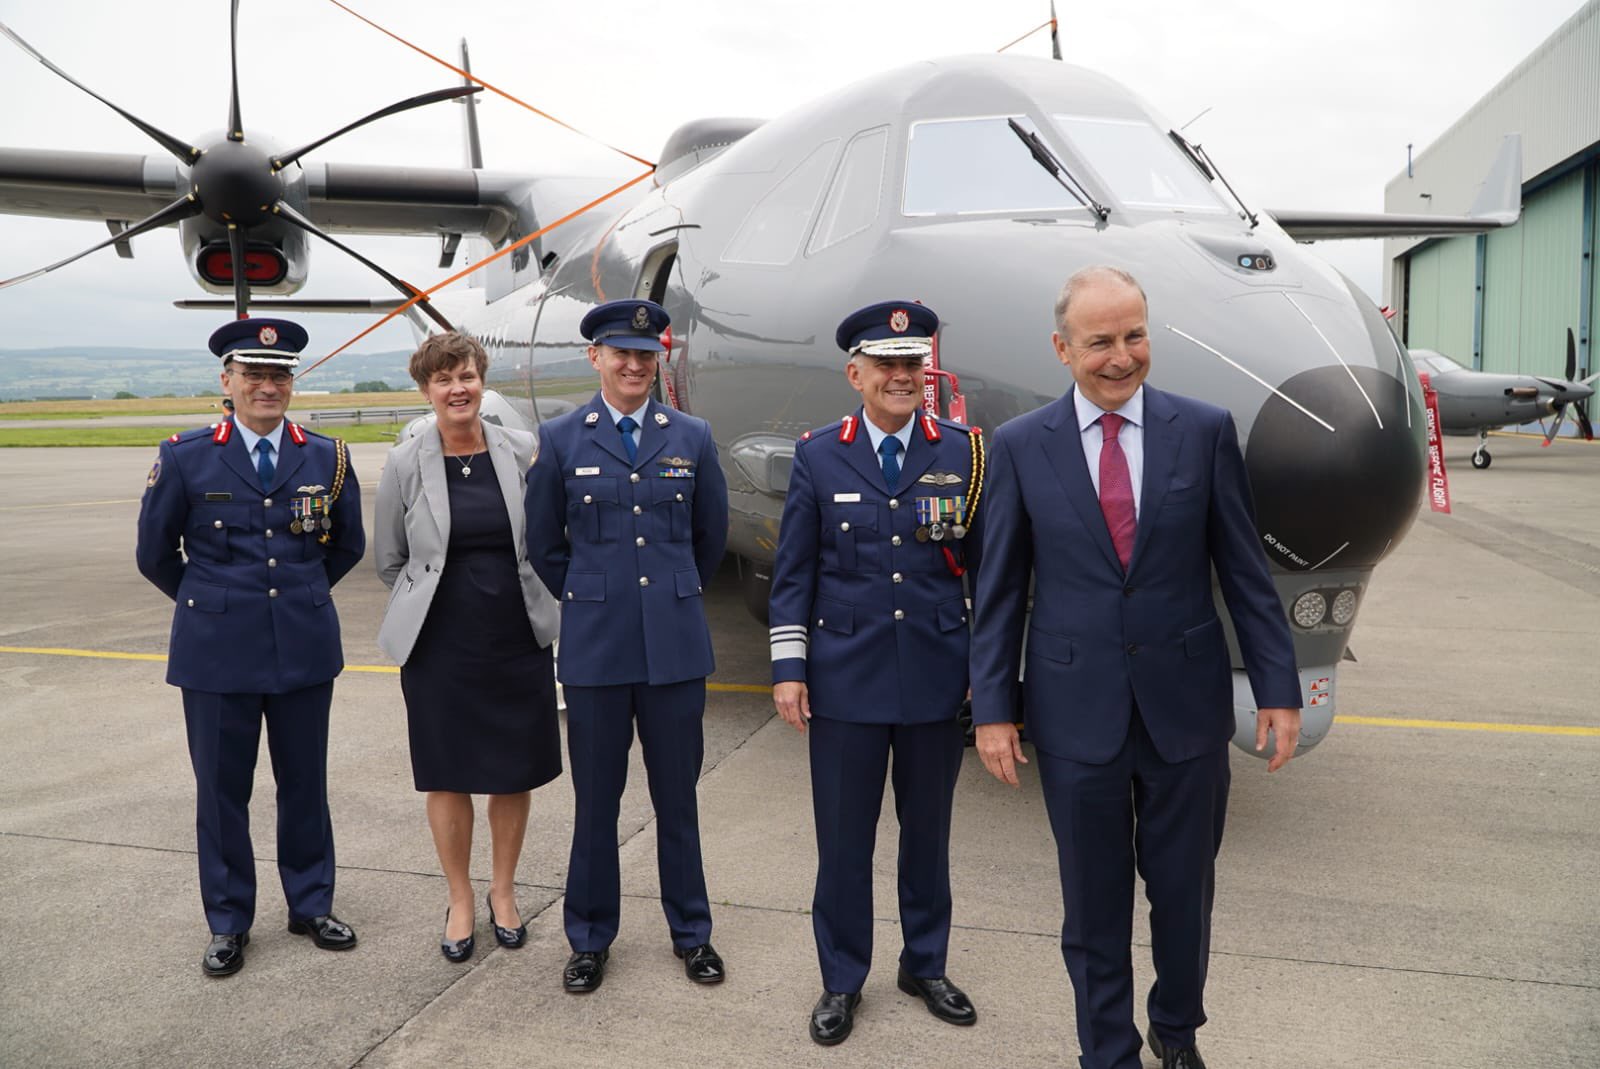 Ireland welcomes the arrival of the first of two Airbus C295 Maritime Patrol Aircraft  at Casement Aerodrome.